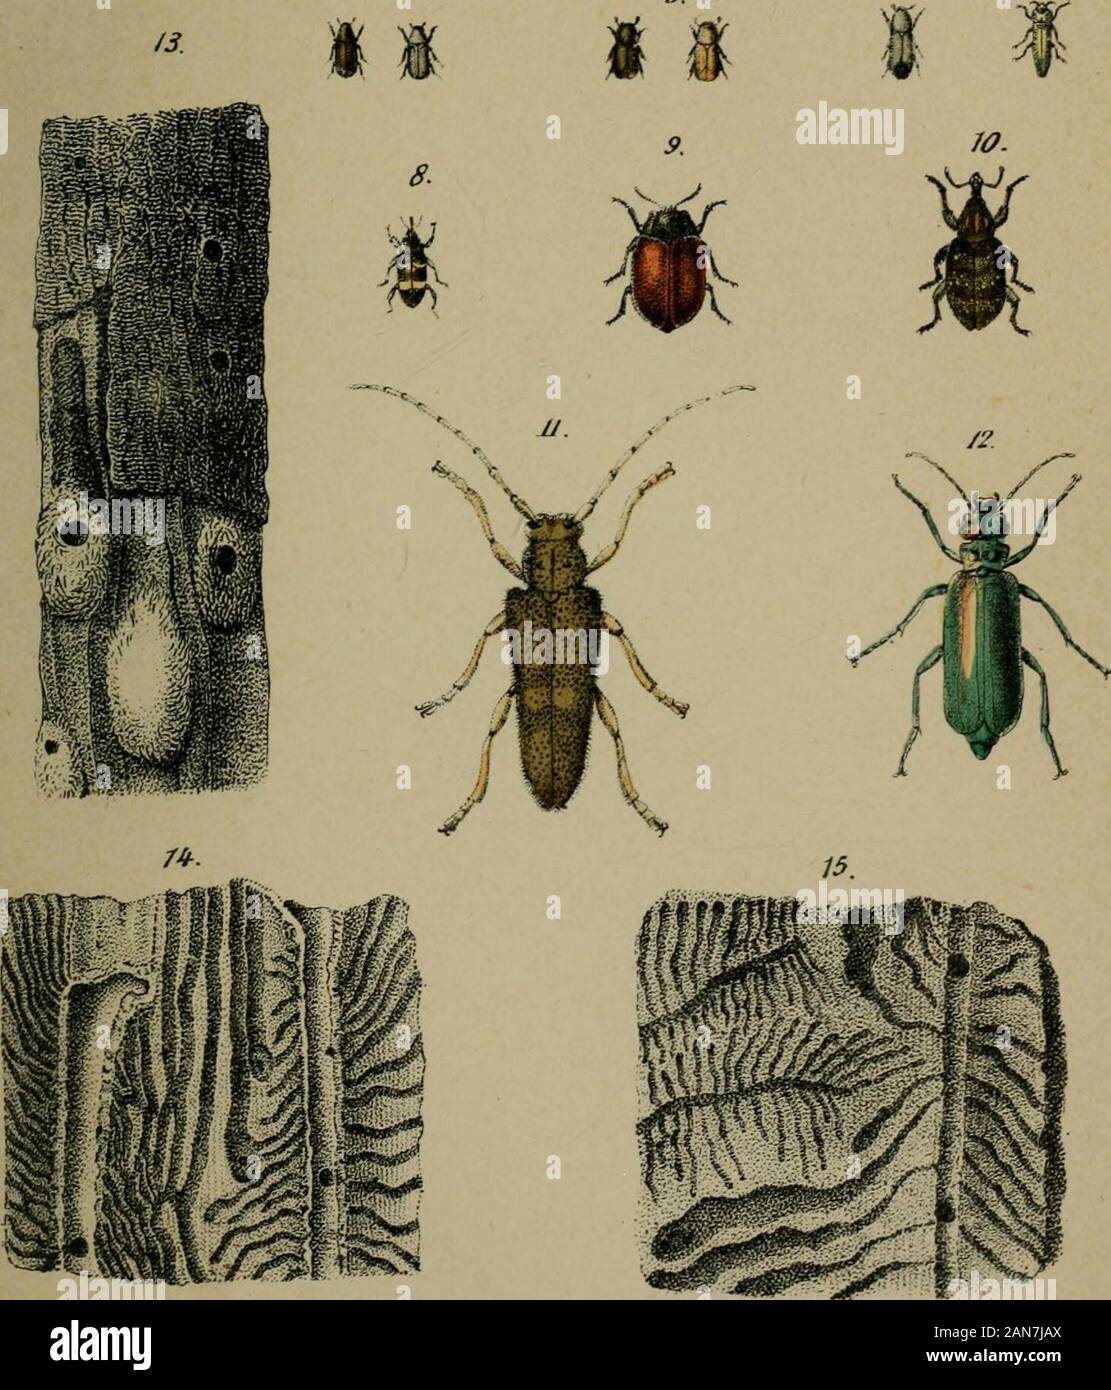 The protection of woodlands against dangers arising from organic and inorganic causes; as re-arranged for the 4th edof Kauschinger's 'Waldschutz' . 6. I. 1. IchneumonFly (Ichneumon nigritariusj. 2. Gold Beetle (Clerus formicariusj. 3. Predatory Fly (Tachina laevigata). 4. Pine Beetle (Hylurgus piniperda). 5. 8-toothed Spruce Bark-Beetle (Bost- richus typnqraphusj. 6. Large 12-toothed pine Bark-Beetle (Bostrichus stenographus). 7. Green Saw-horn Beetle fAgrilusviridisJ. 8. Small brown Pine weevil fPissodes notatusj. 9. Eed Poplar Leaf-beetle (Lina populij. 10. Pine weevil (Hylobius abietisj. 11 Stock Photo